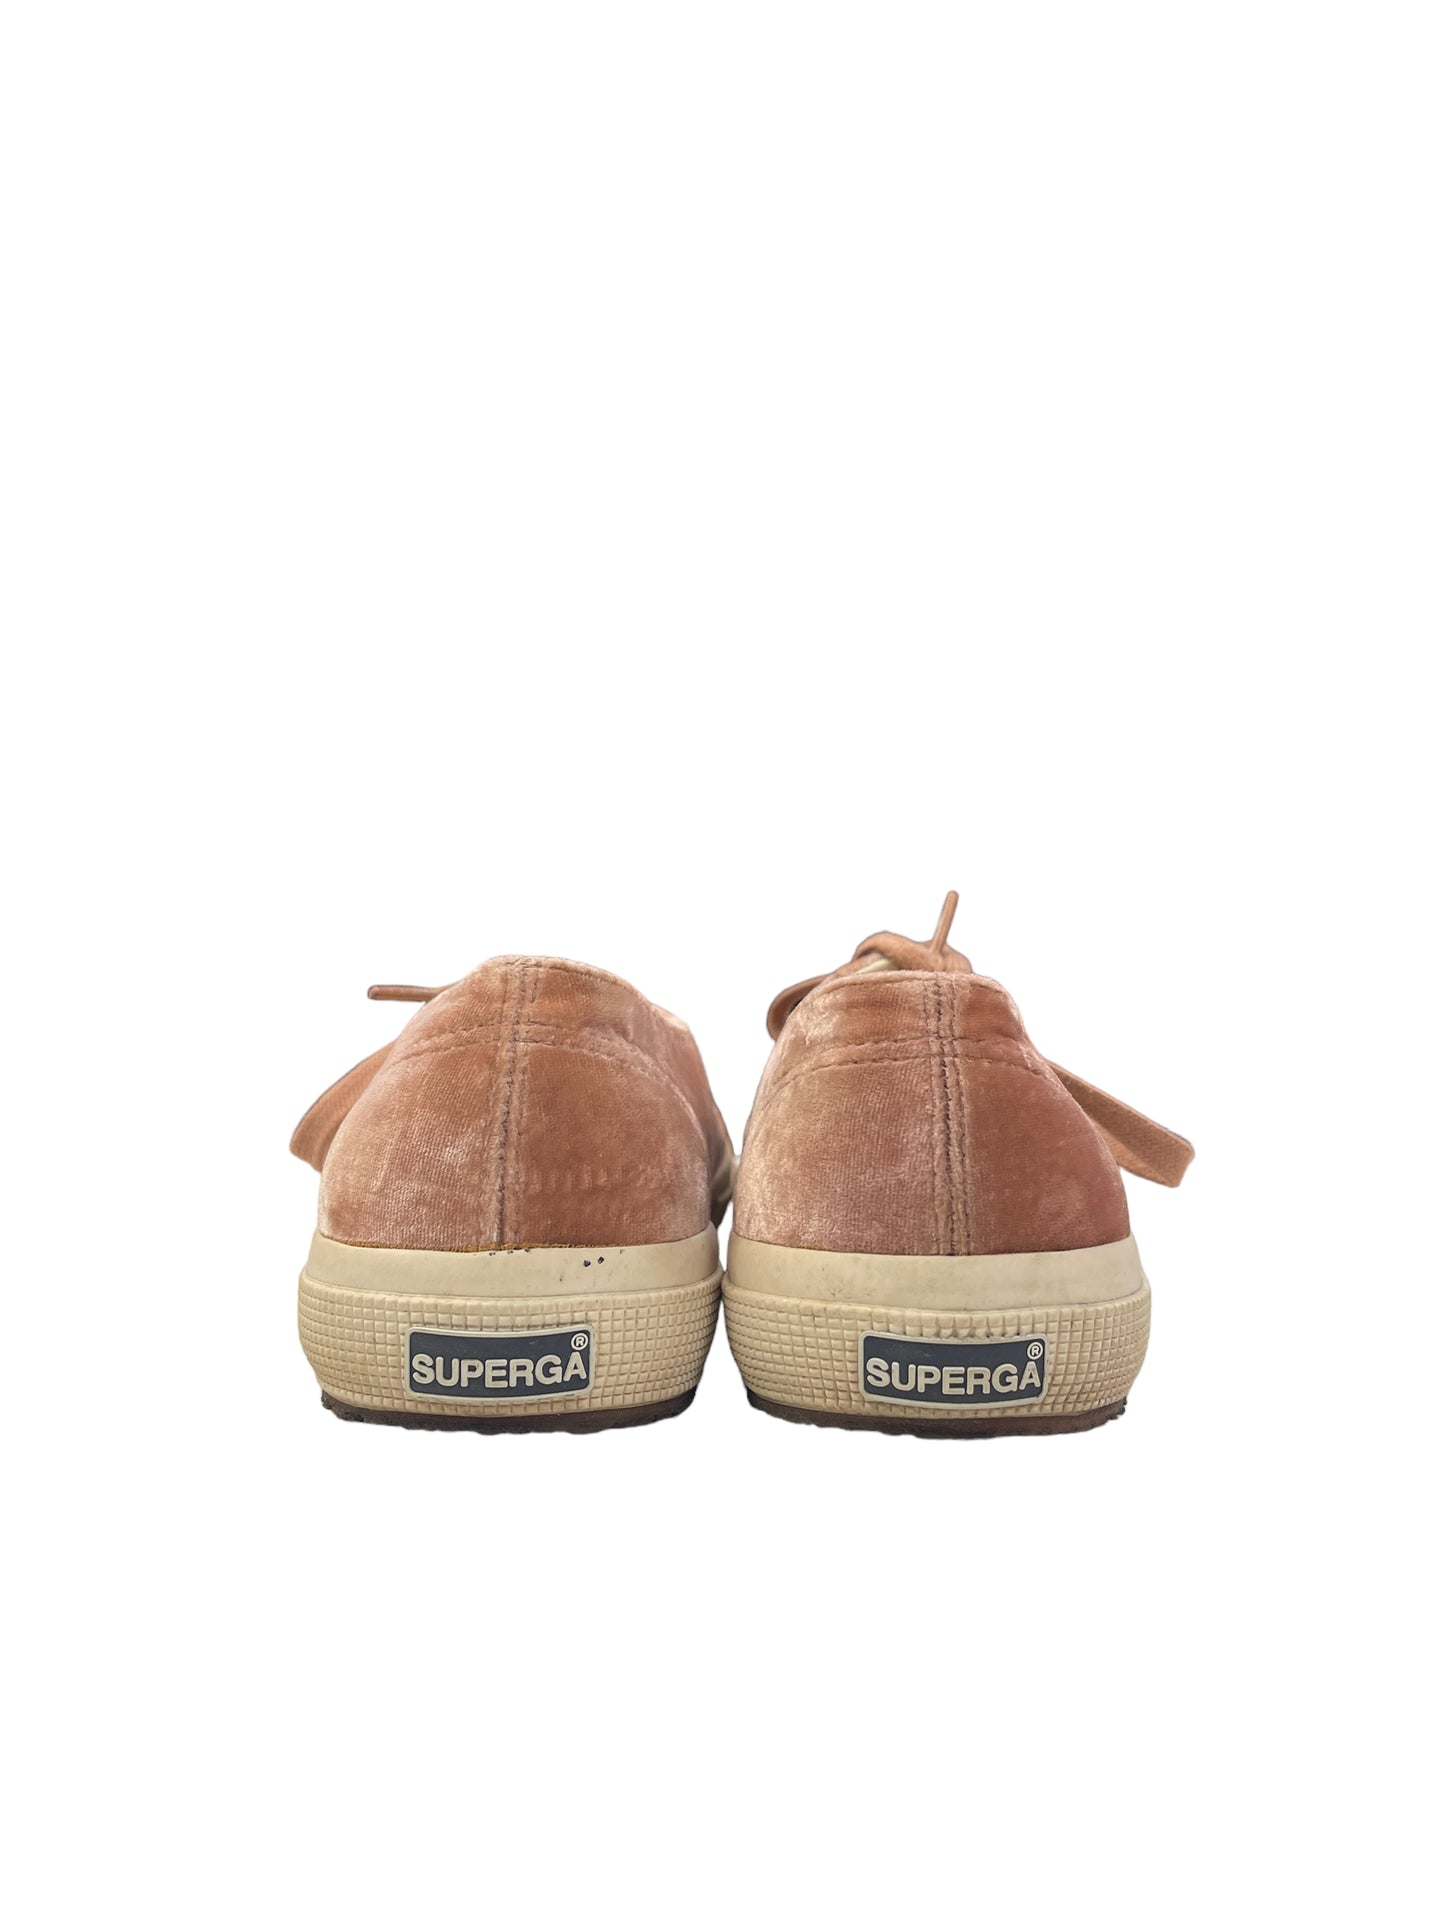 Shoes Flats Loafer Oxford By Superga  Size: 8.5